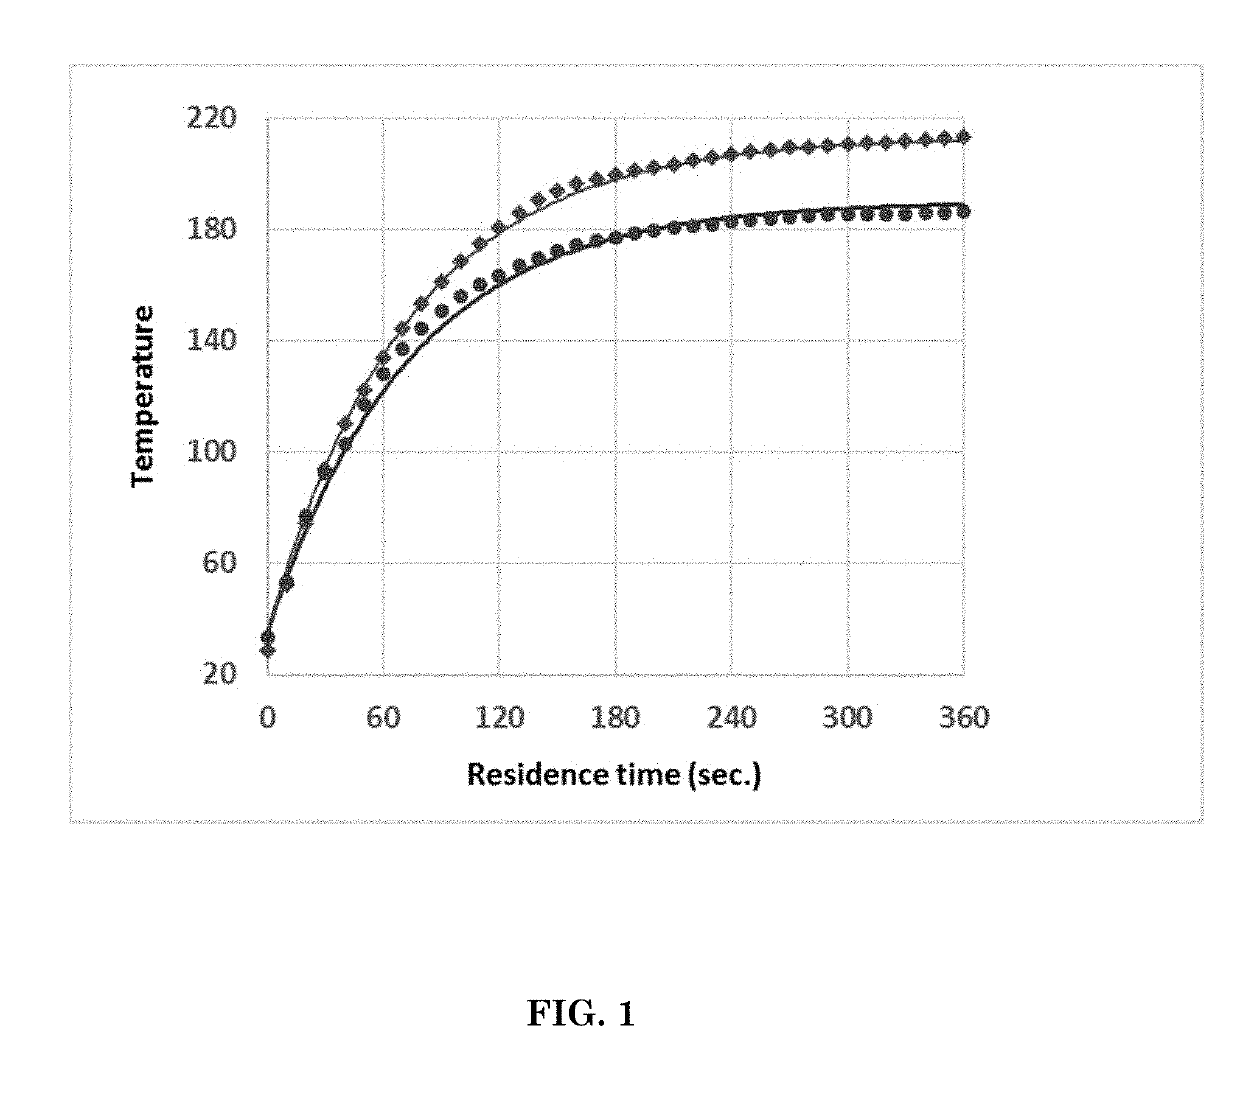 Process for making expandable polyvinyl chloride paste containing trimellitate plasticizers